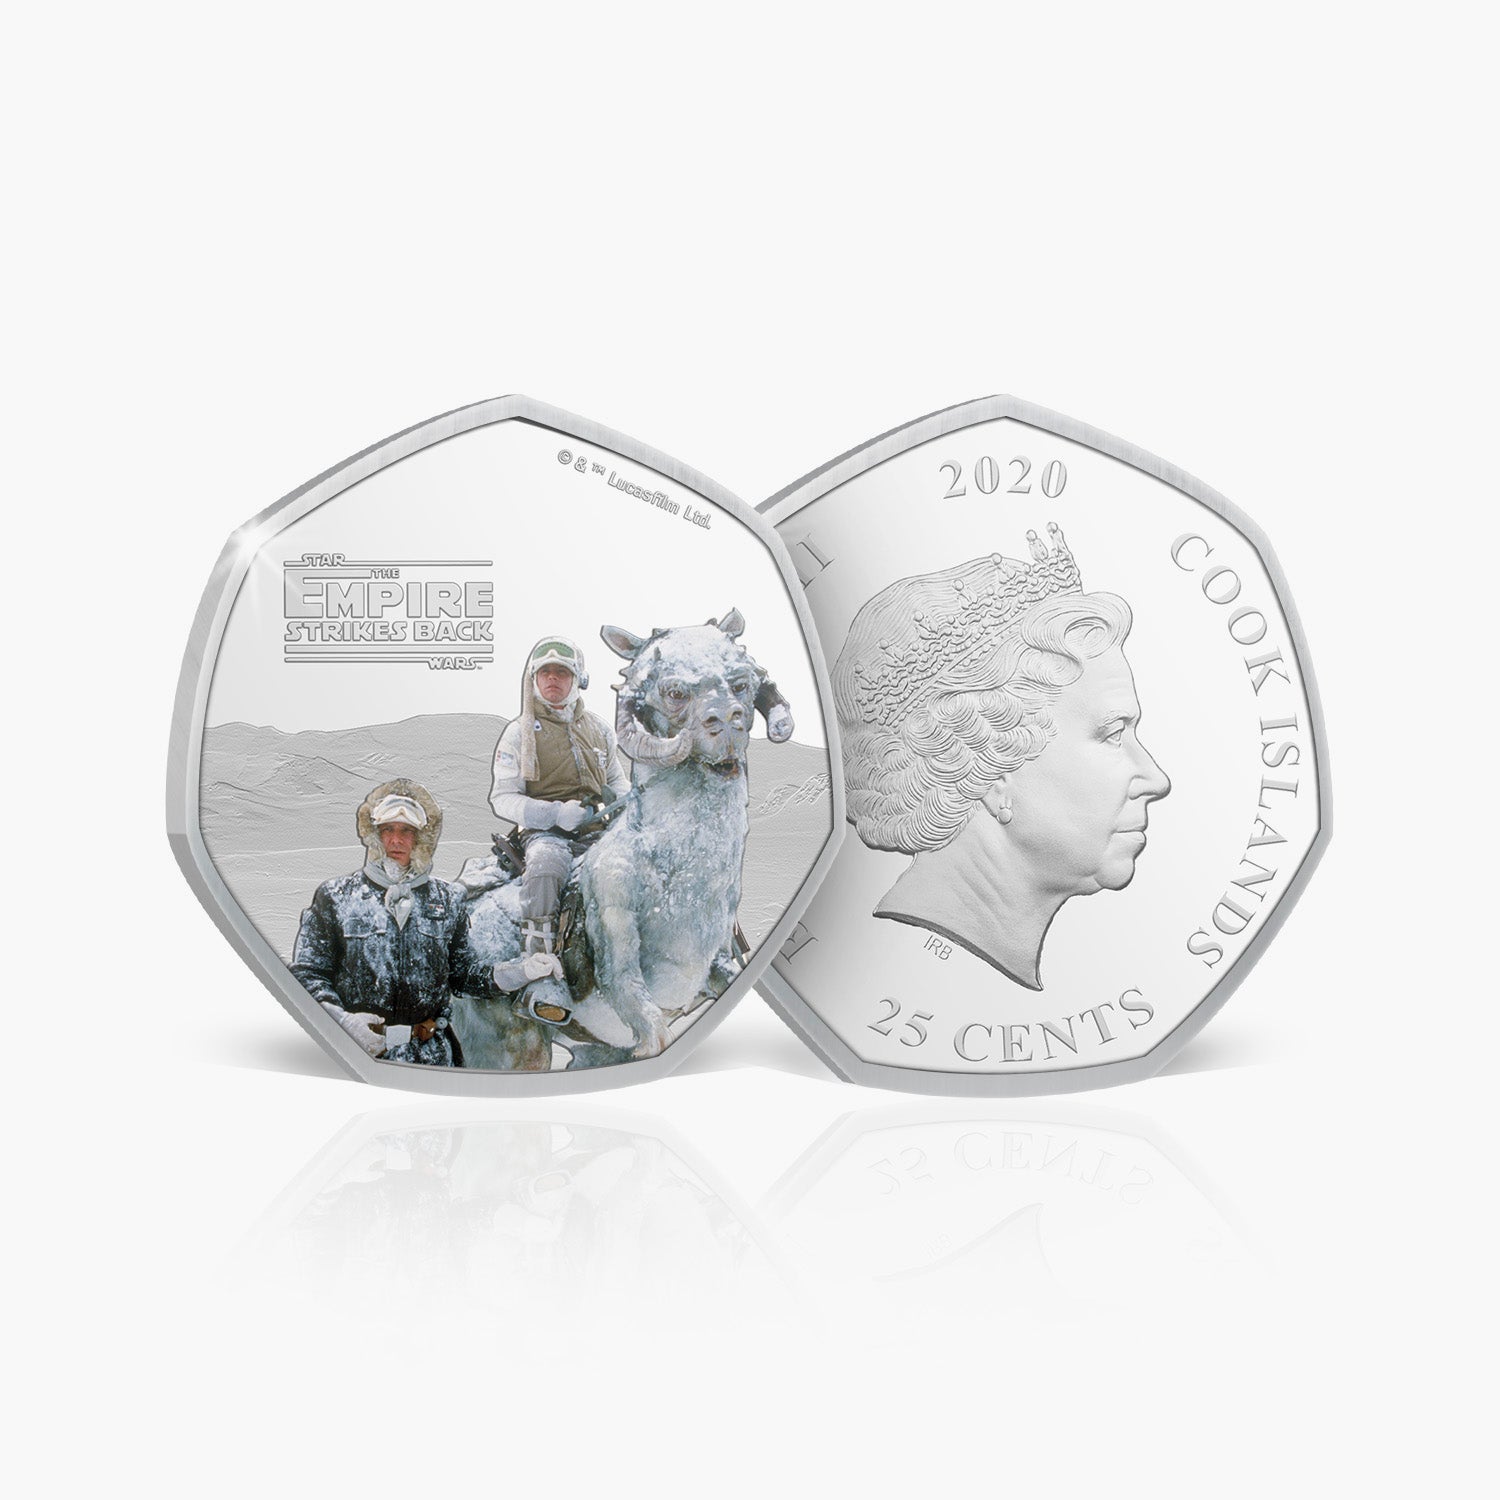 Echo Base Silver Plated Coin